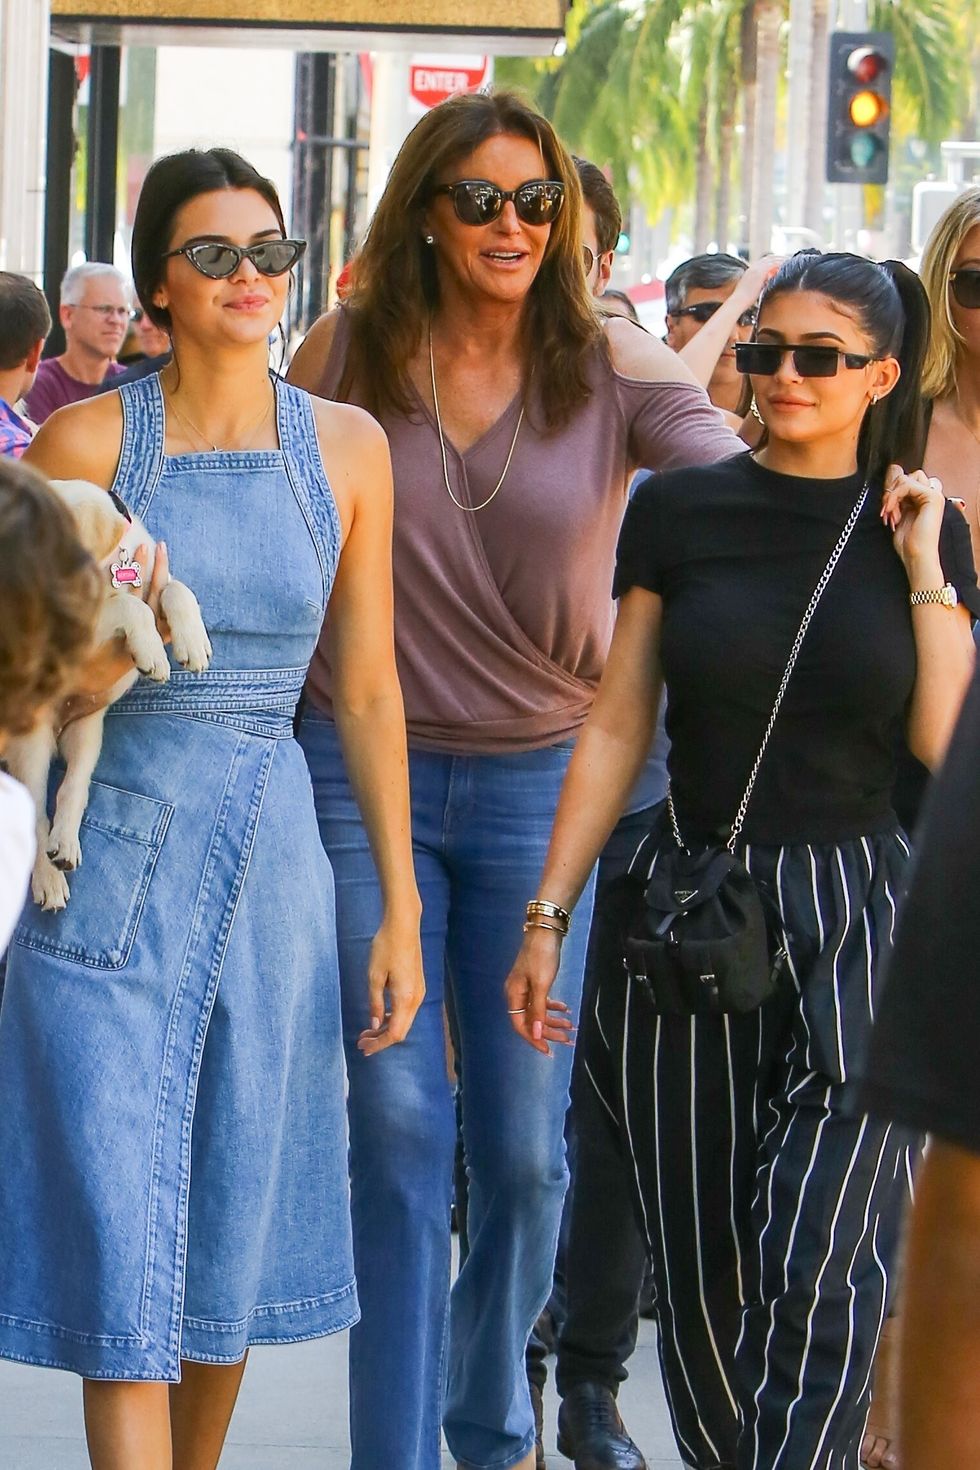 Kendall Jenner Rocks Crop Top For Dinner With Dad Caitlyn Jenner